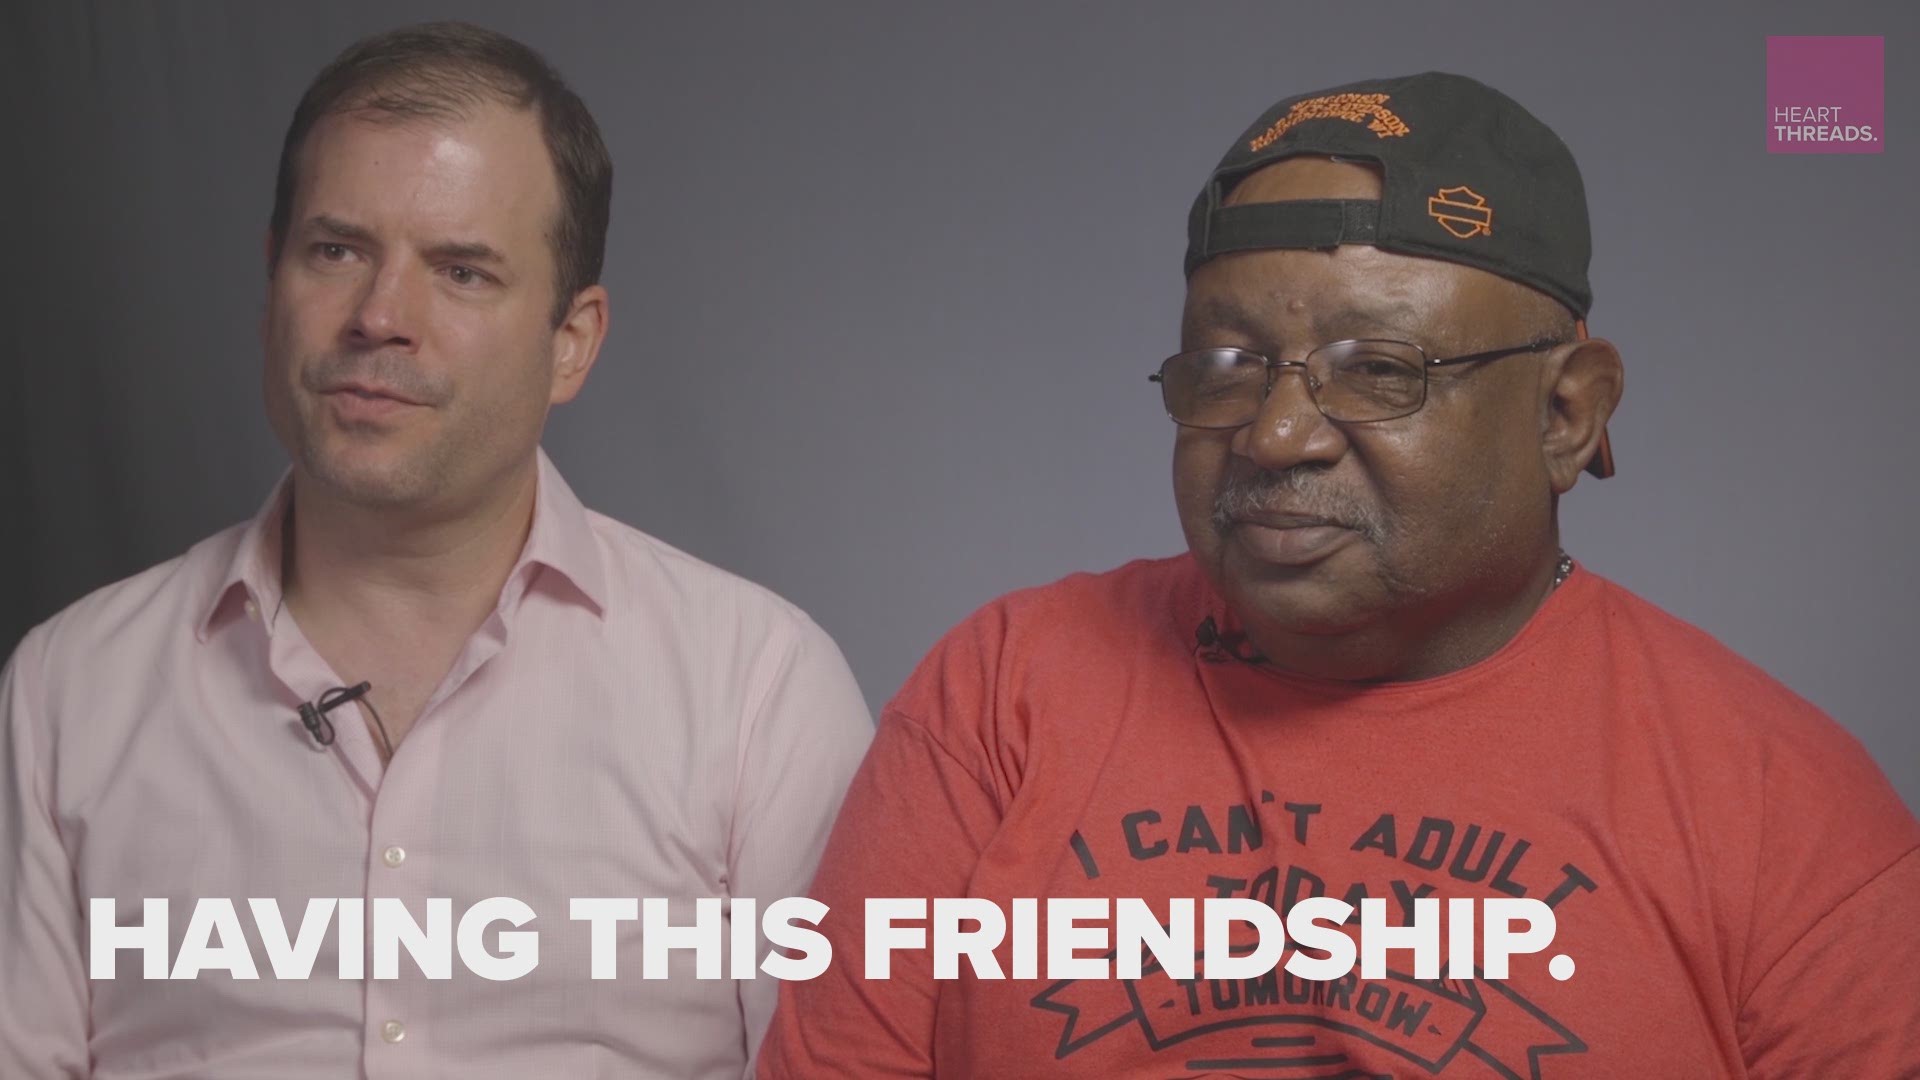 After losing his job, Reed Sandridge saw a chance to give back. He never expected to befriend Anthony Crawford, who had been homeless for 15 years, and begin a business together.